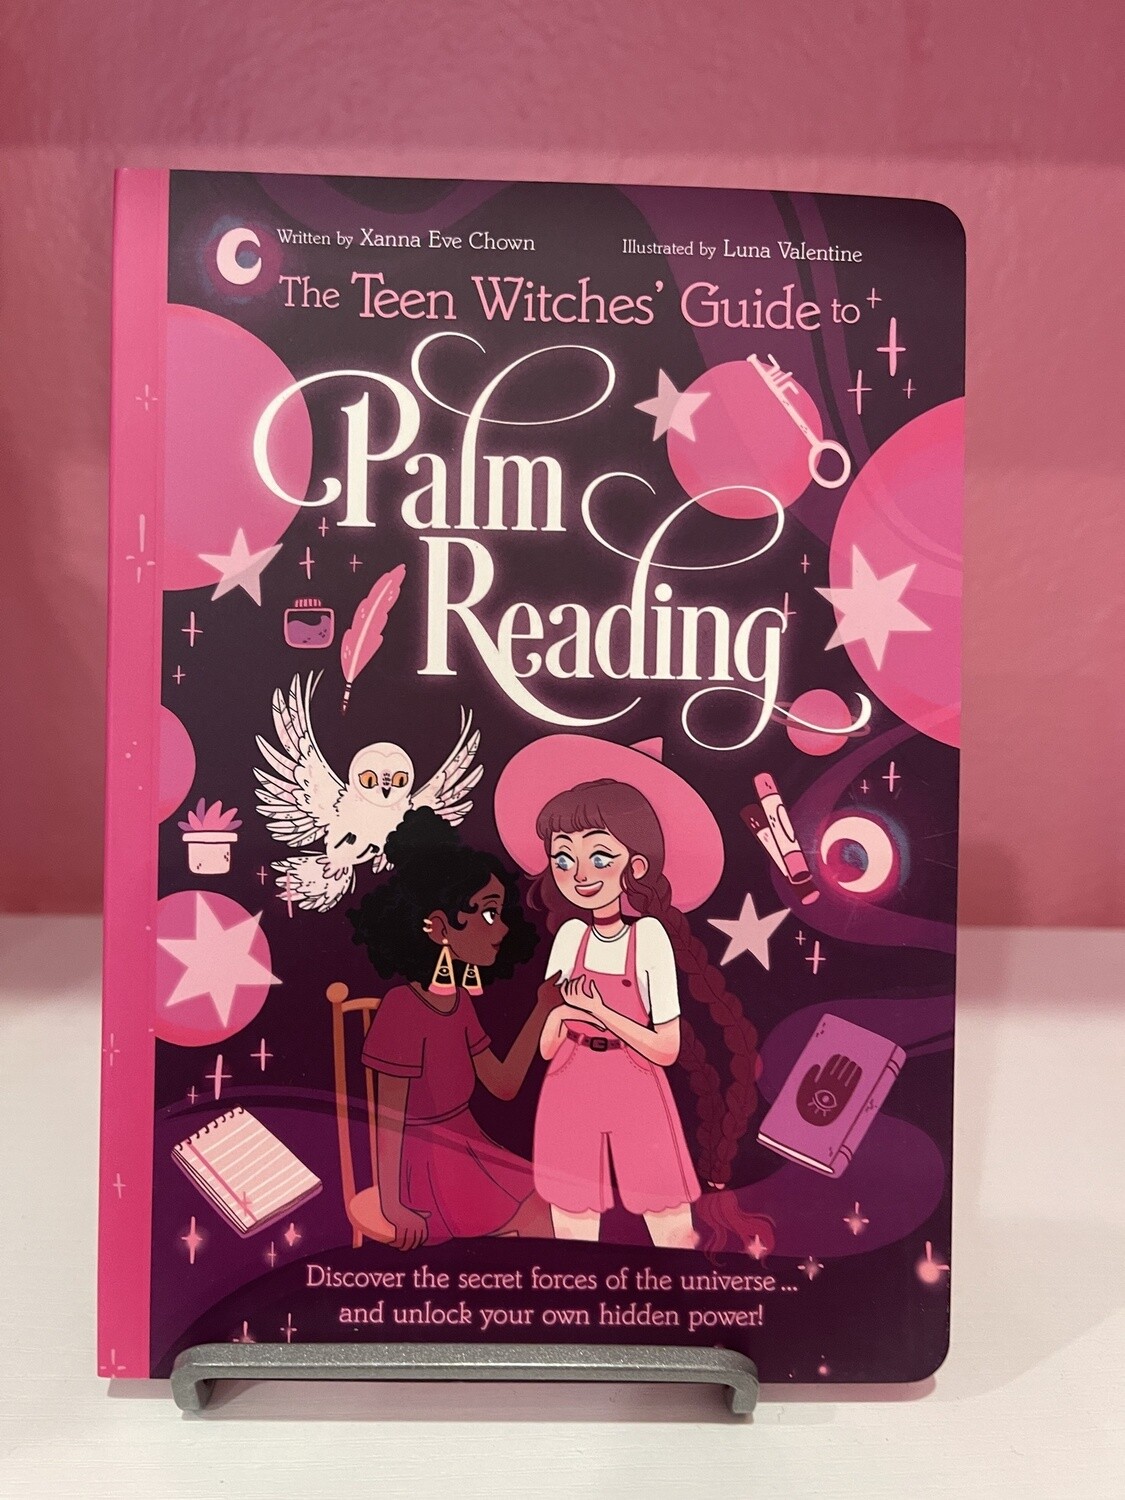 The Teen Witches' Guide to Palm Reading